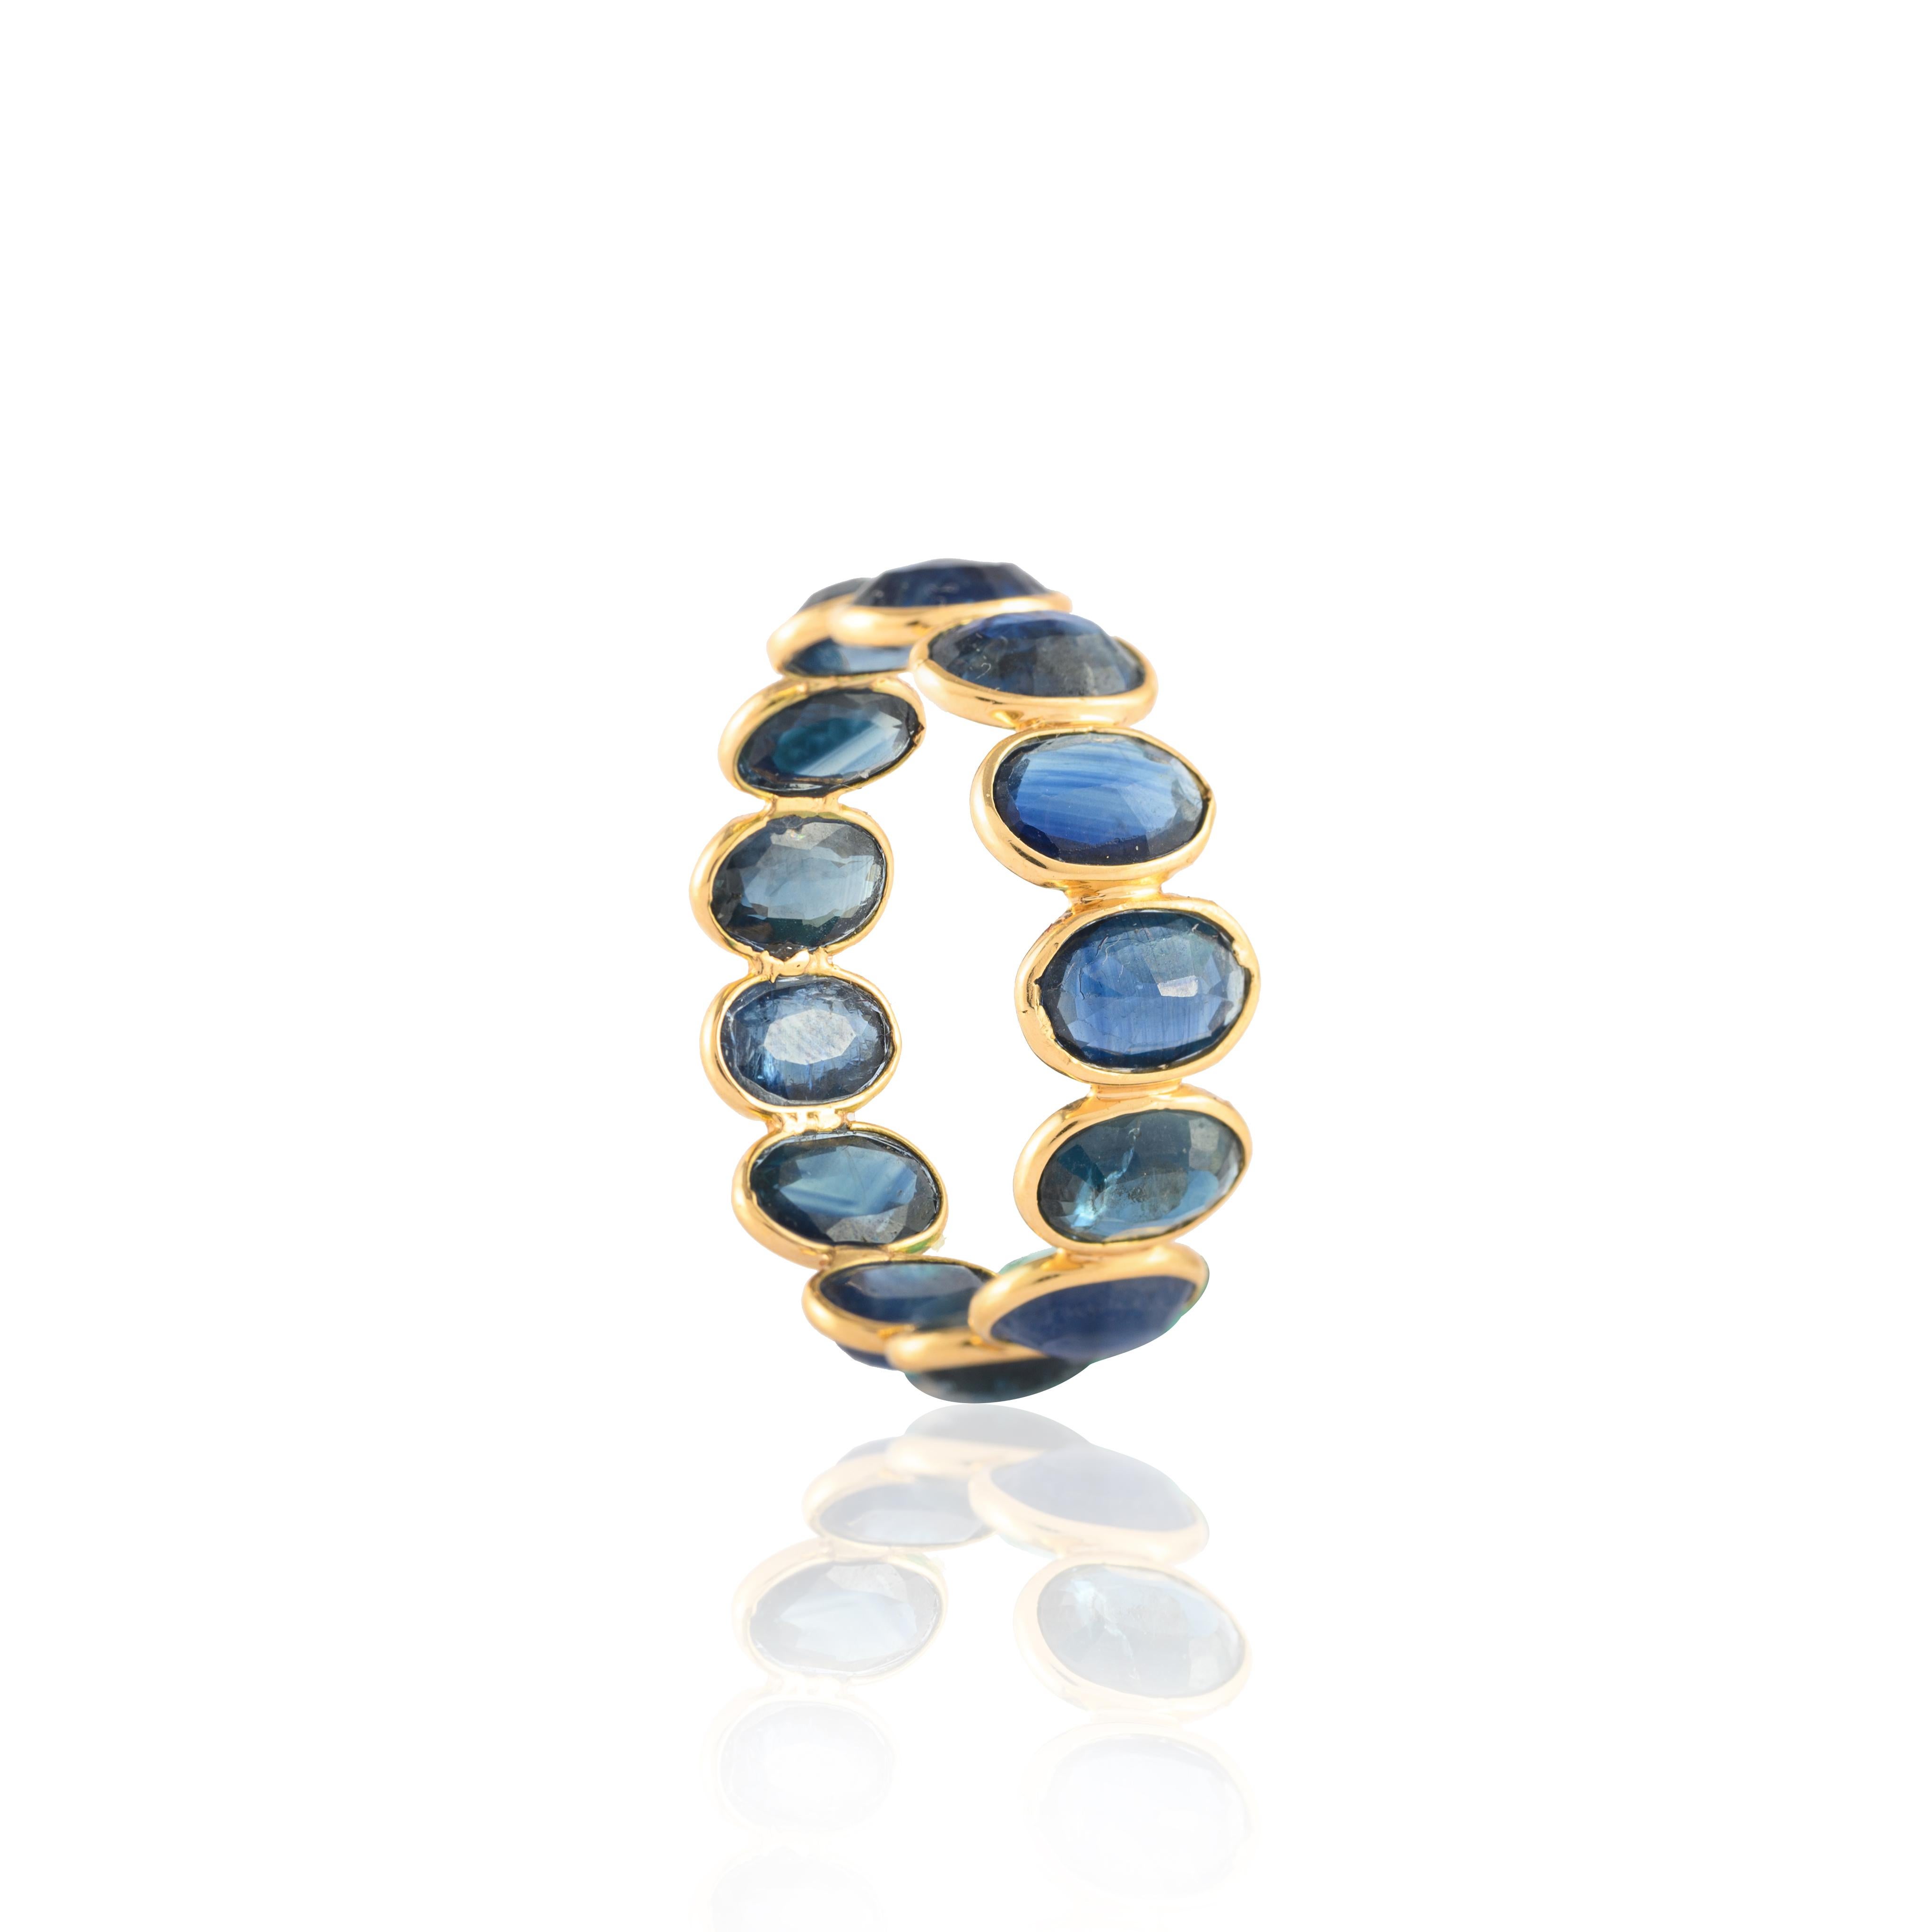 For Sale:  7.8 Carat Continual Oval Blue Sapphire Eternity Band Ring in 18k Yellow Gold 9